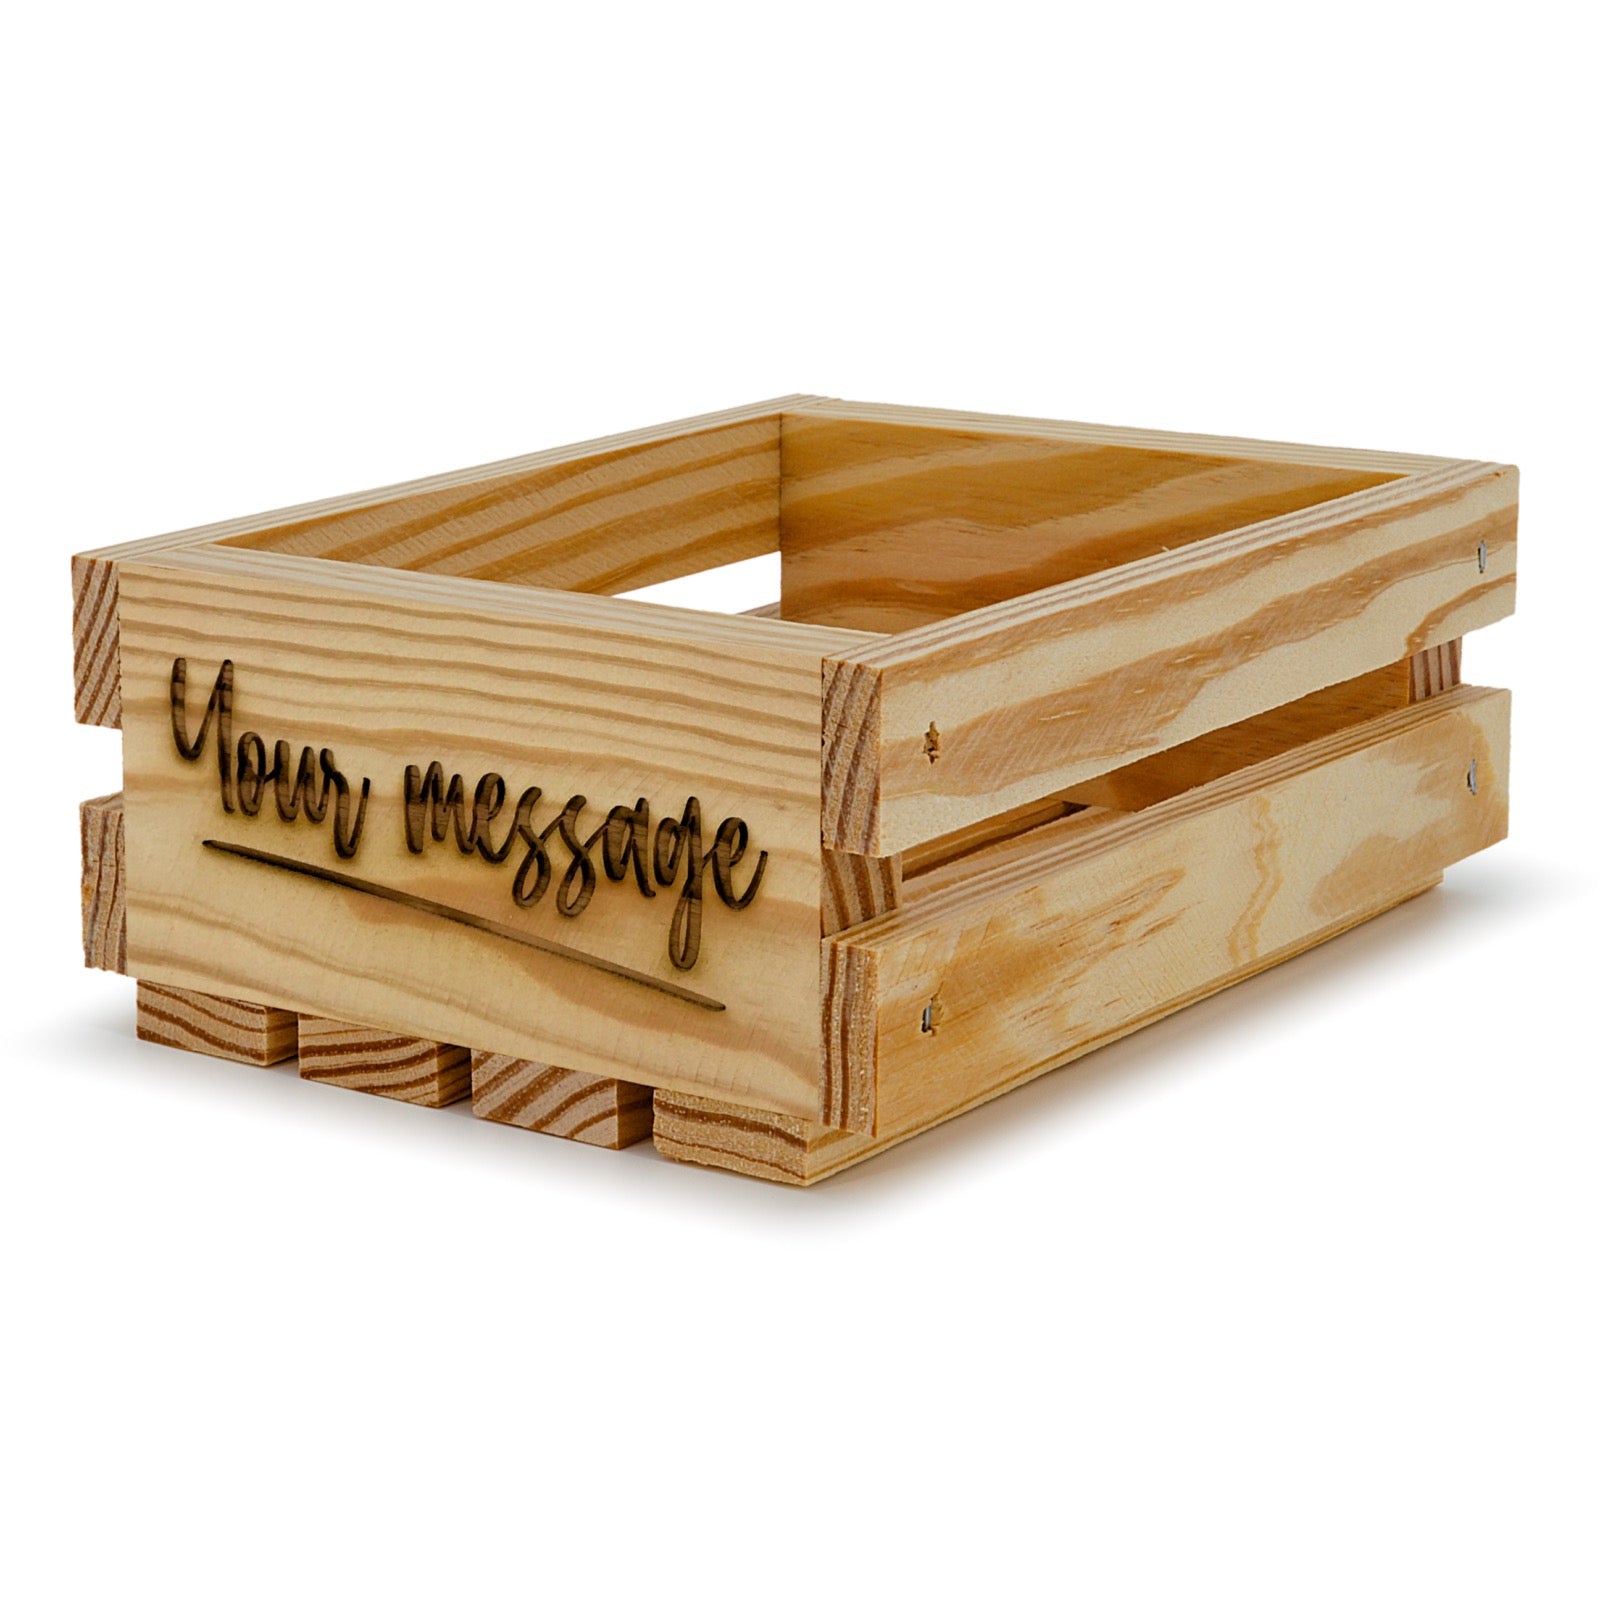 Small wooden crates 6x5x2.5 your message included, 6-SS-6-5-2.5-ST-NW-NL, 12-SS-6-5-2.5-ST-NW-NL, 24-SS-6-5-2.5-ST-NW-NL, 48-SS-6-5-2.5-ST-NW-NL, 96-SS-6-5-2.5-ST-NW-NL